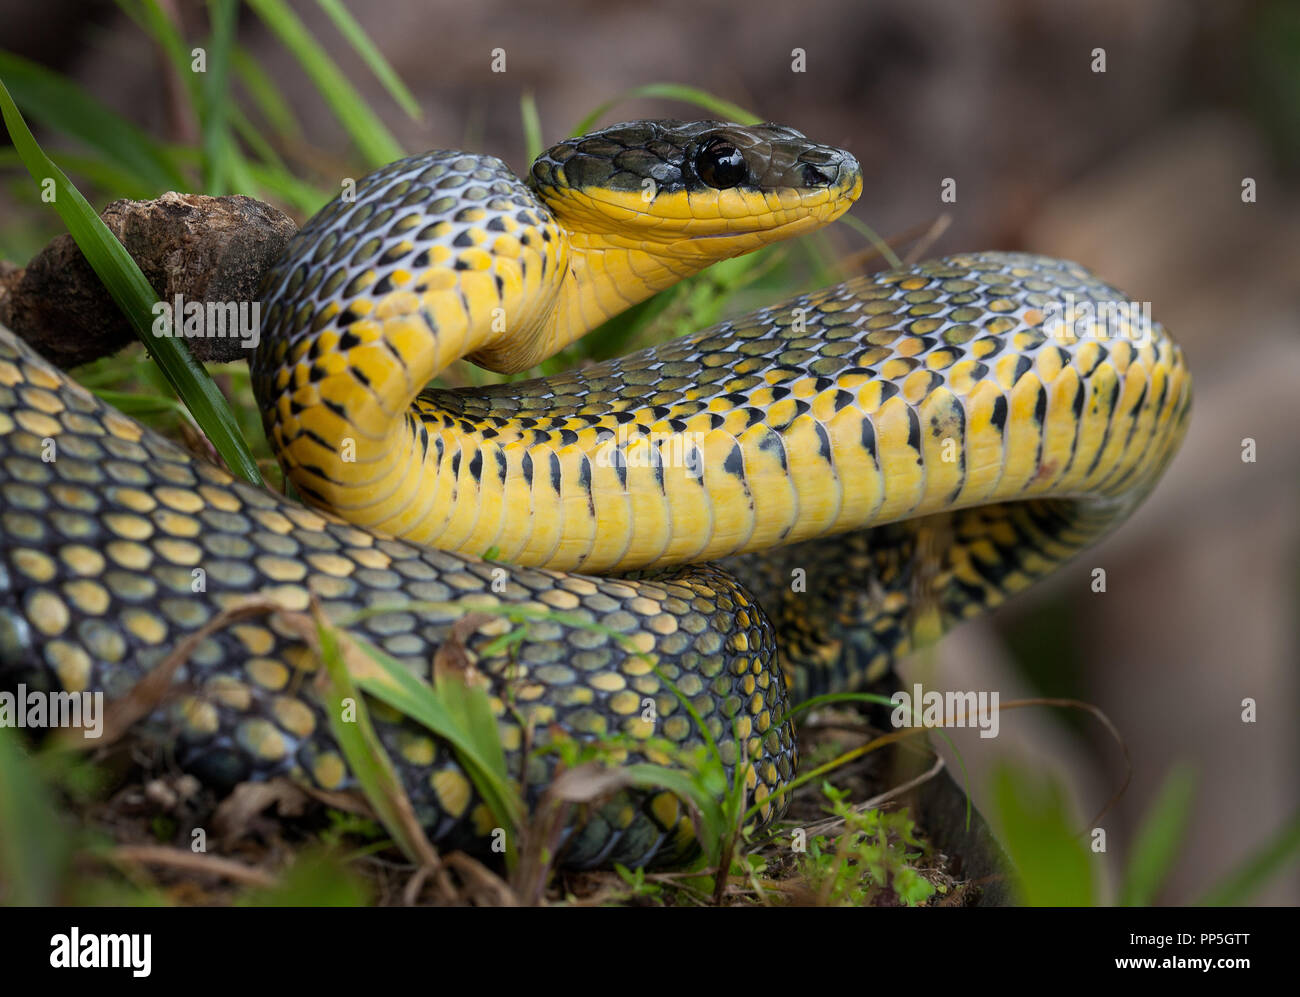 A bird snake photographed in Costa Rica Stock Photo